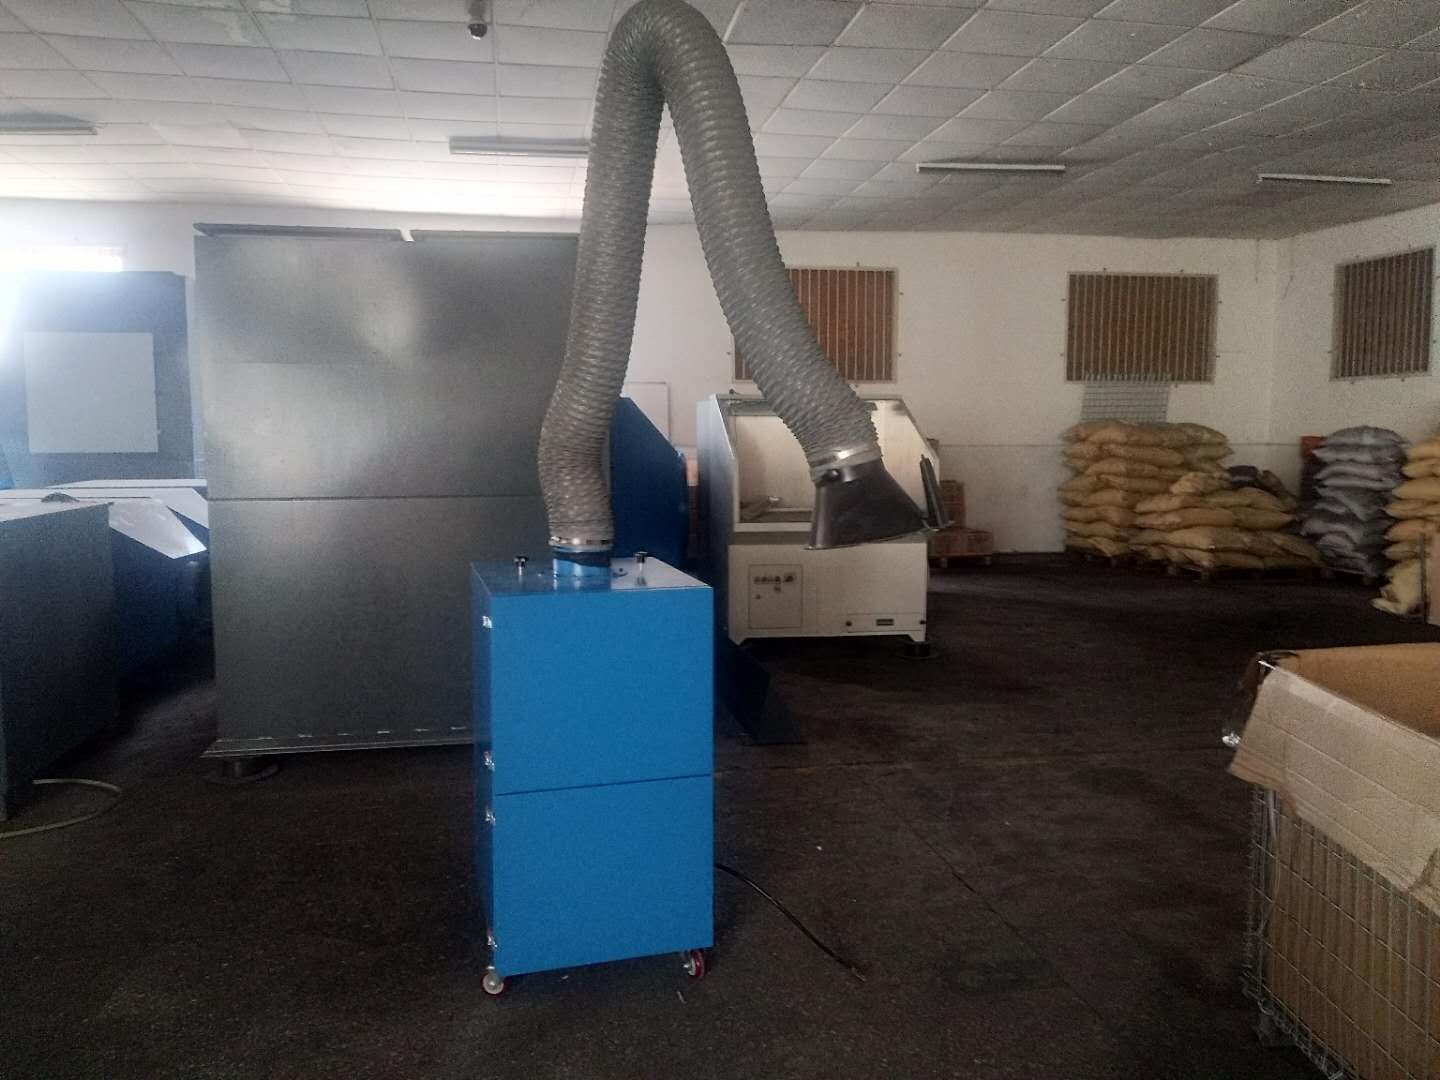 Precision Improvement of High Efficiency Cylinder Dust Collector Cylinder in Wenzhou, Zhejiang Province